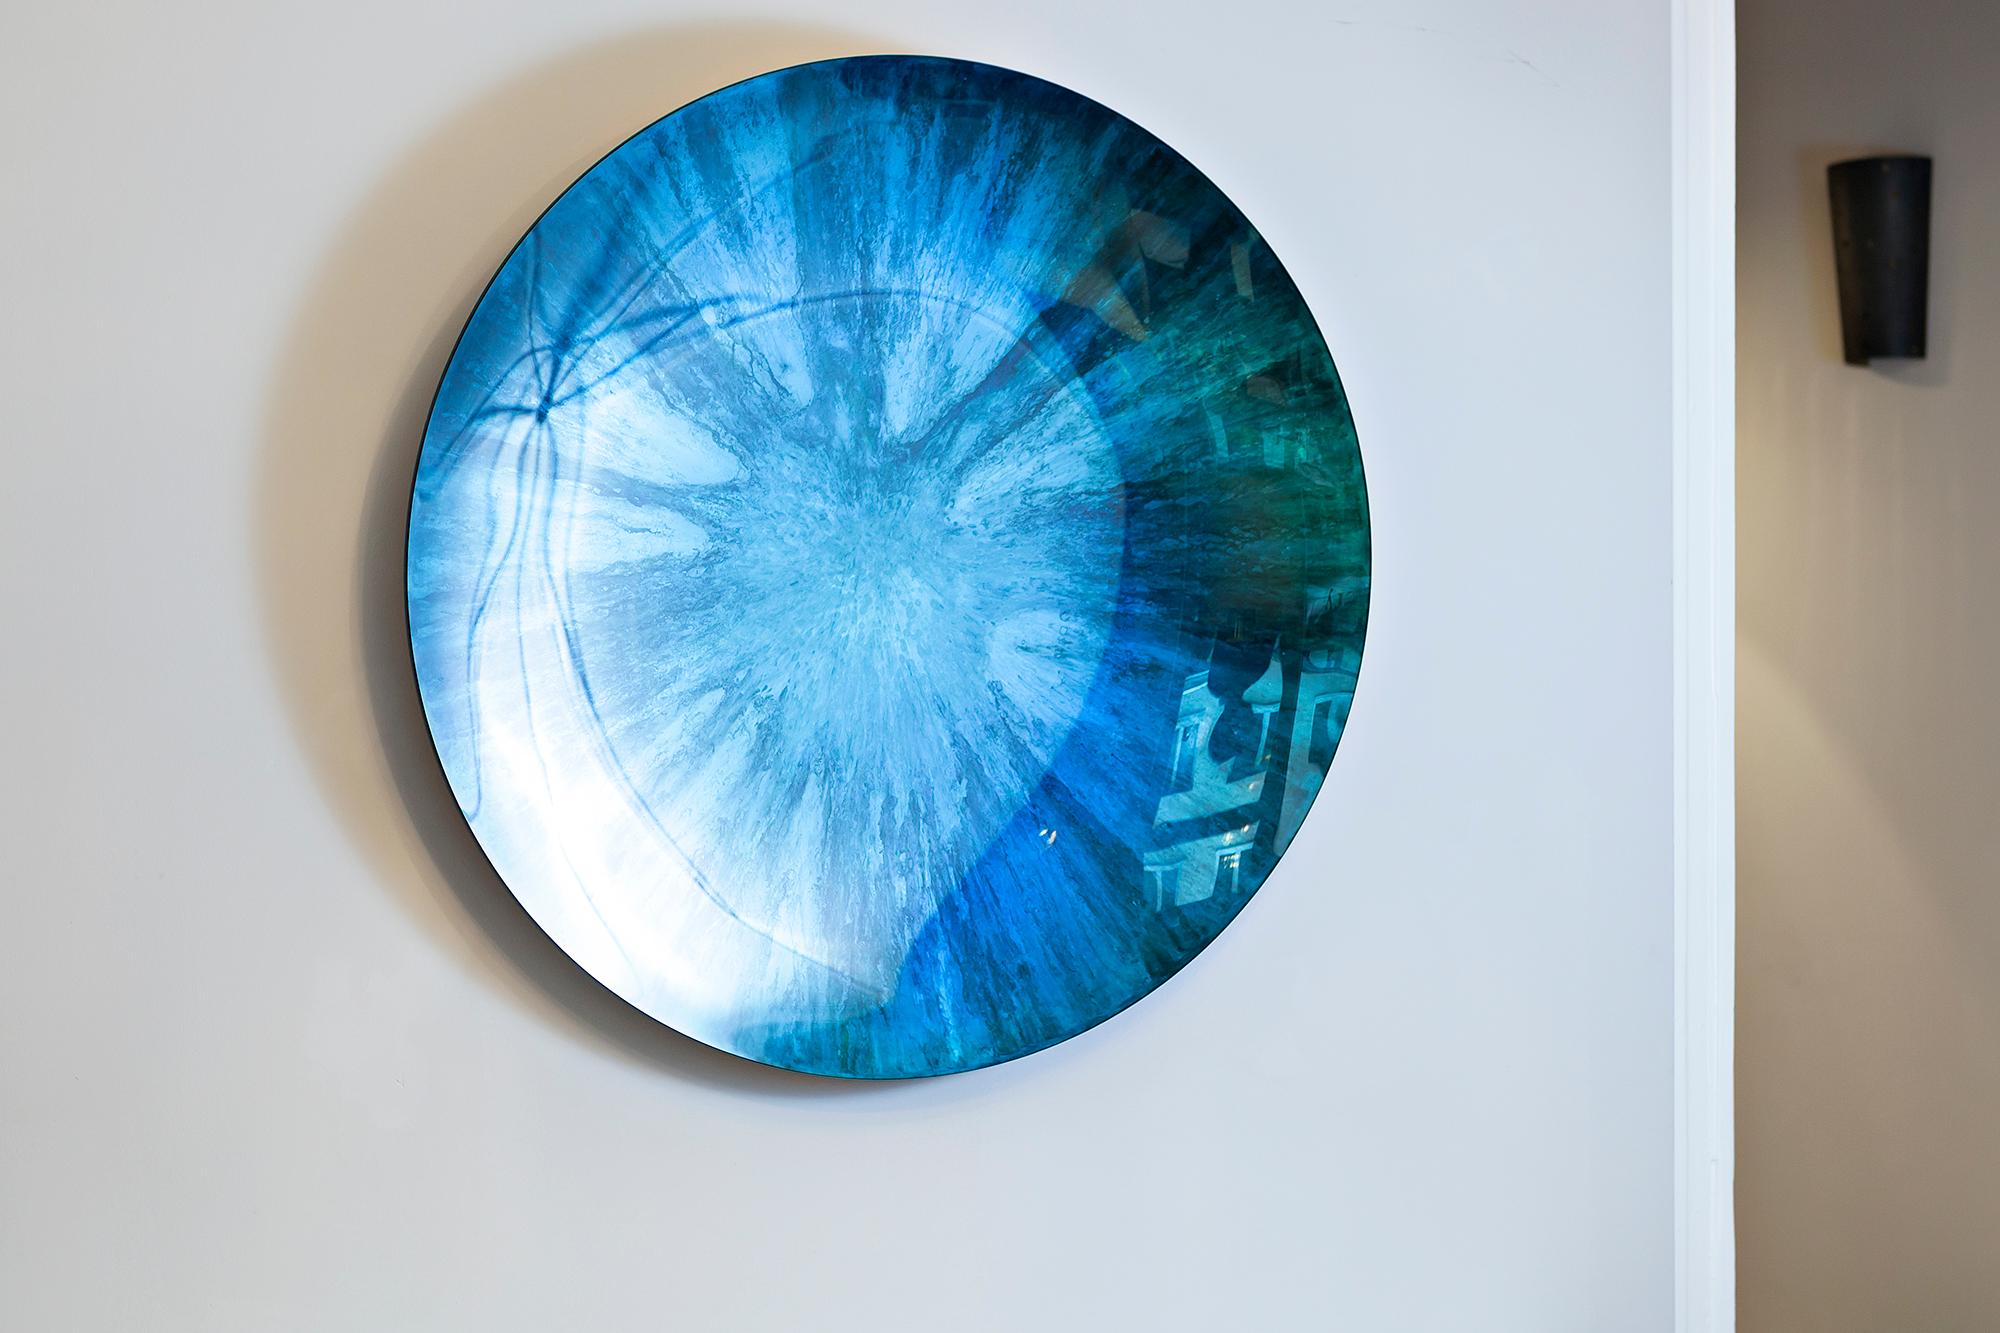 French Mirror Object by Christophe Gaignon, Blue Green Color